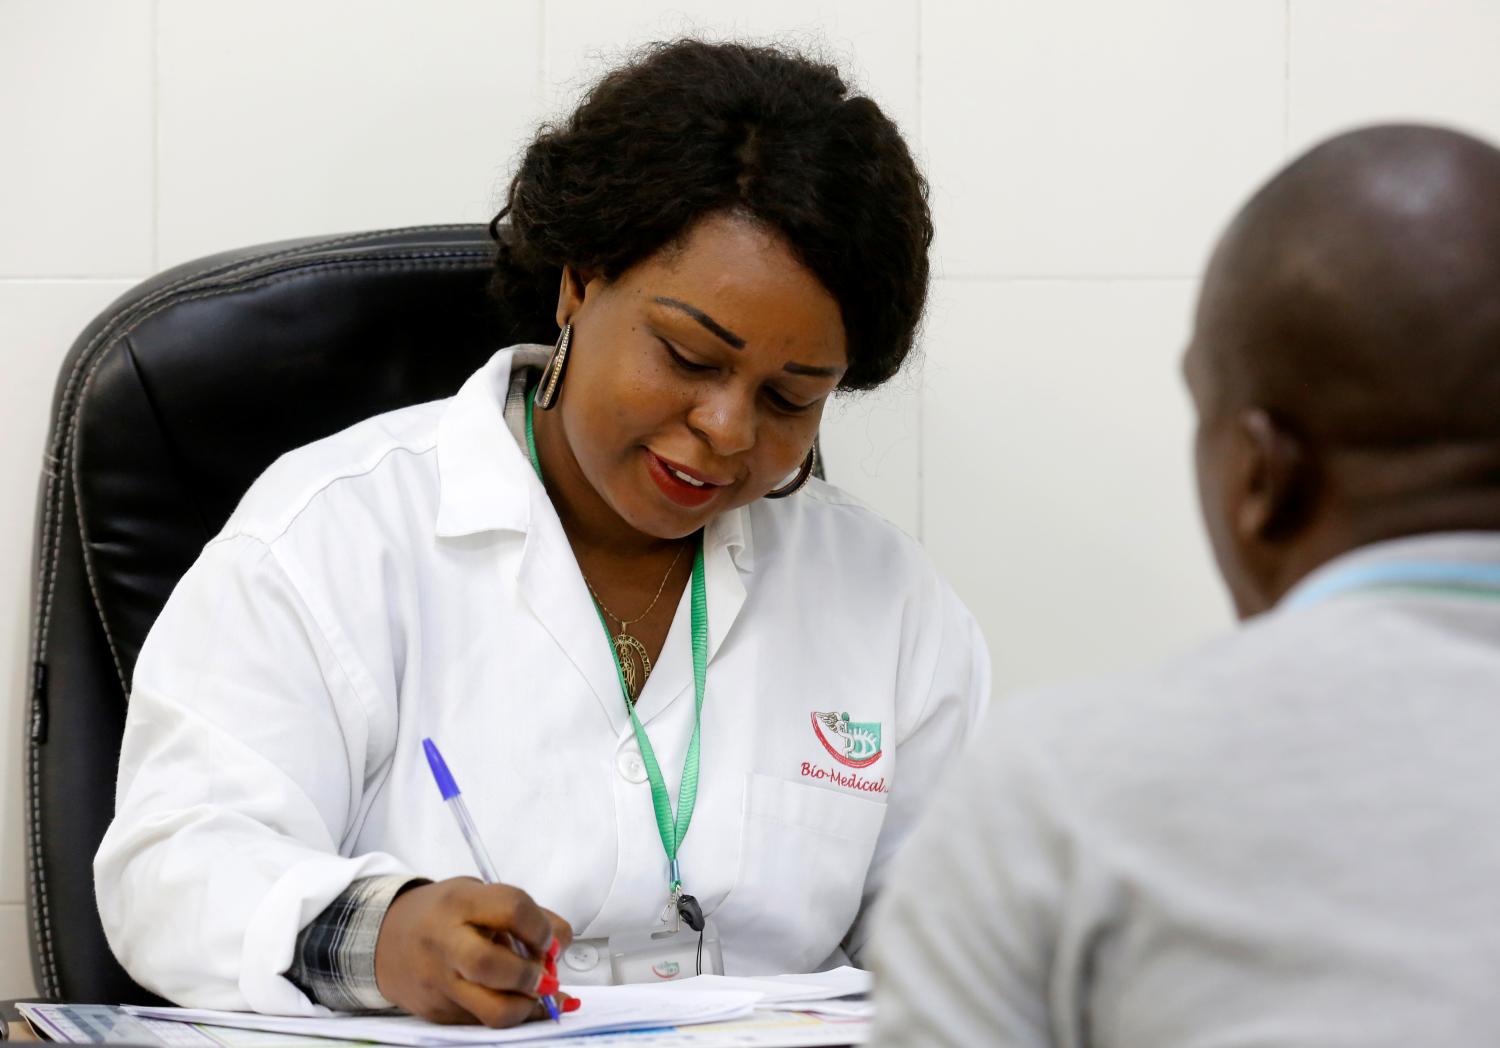 Dr. Christelle Azier-Pohoun of BIO-MEDICAL, a center that provides medical visits for people who pass the driver's license, speaks to a patient during a consultation in Abidjan, March 28, 2019. REUTERS/Thierry Gouegnon. - RC1BC64E9F30